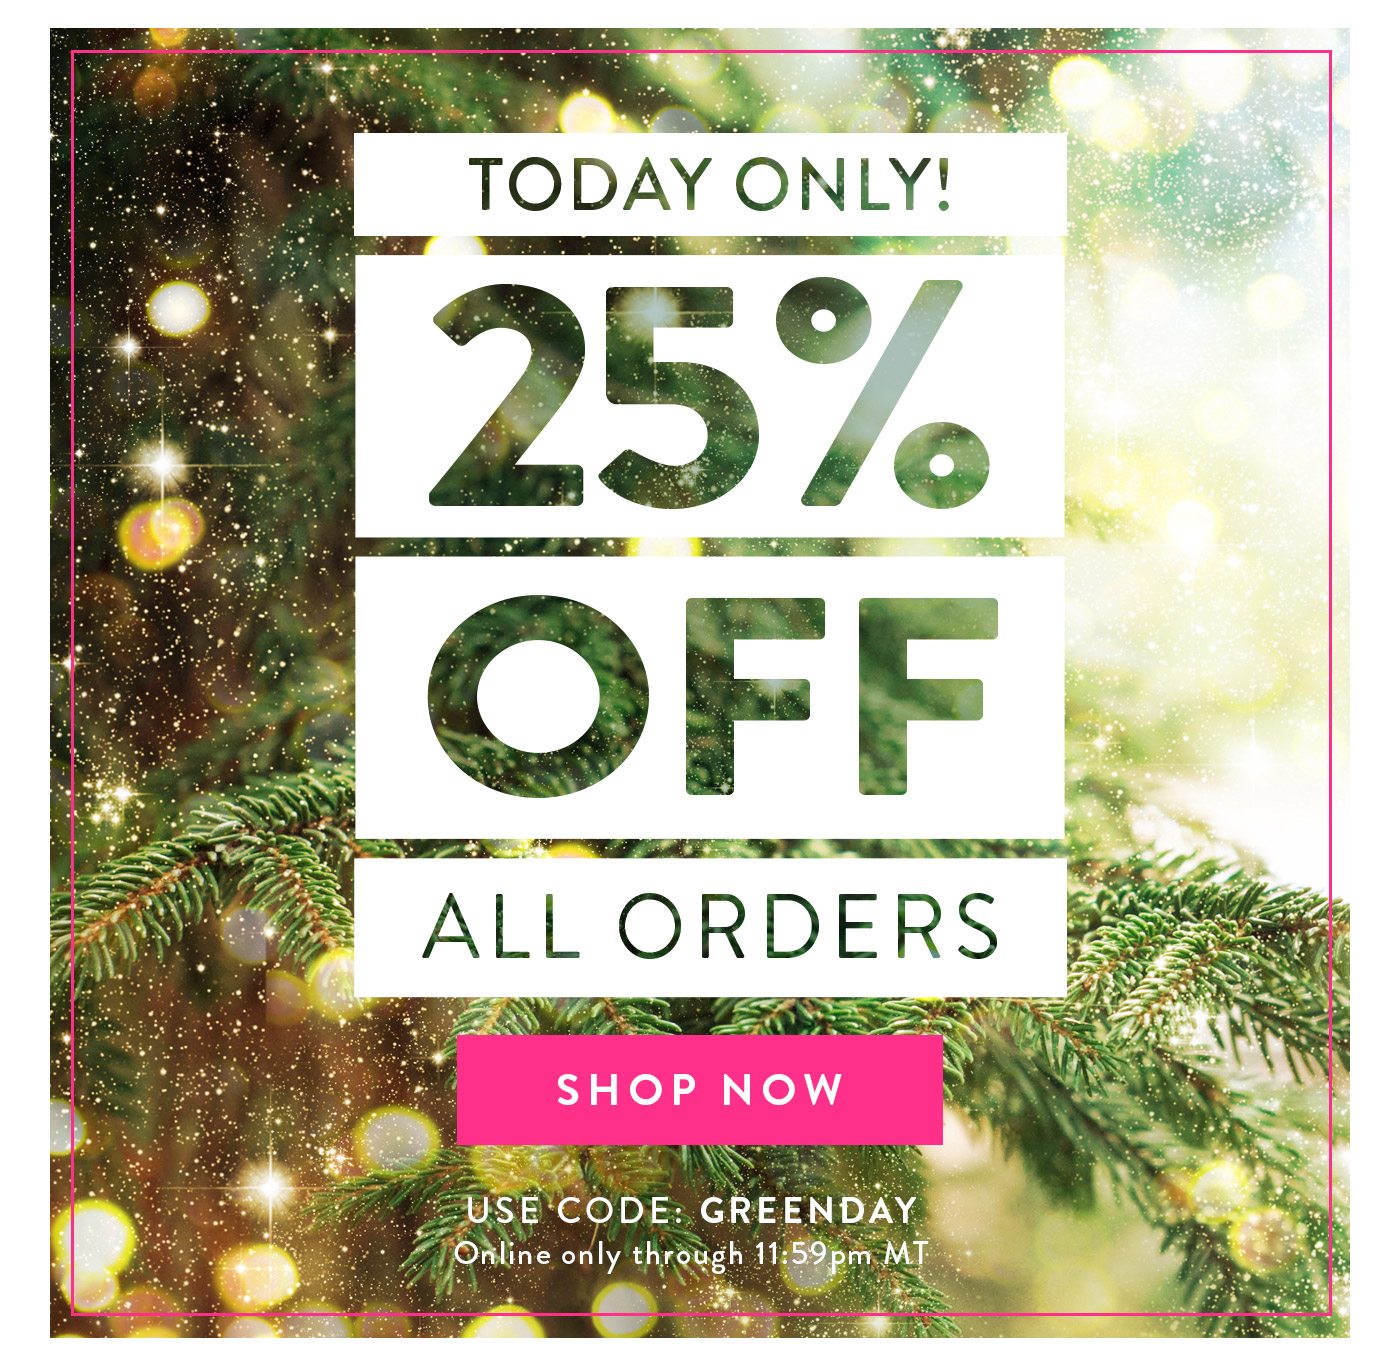 Today only! 25% Off All Orders with code GREENDAY. Shop now!